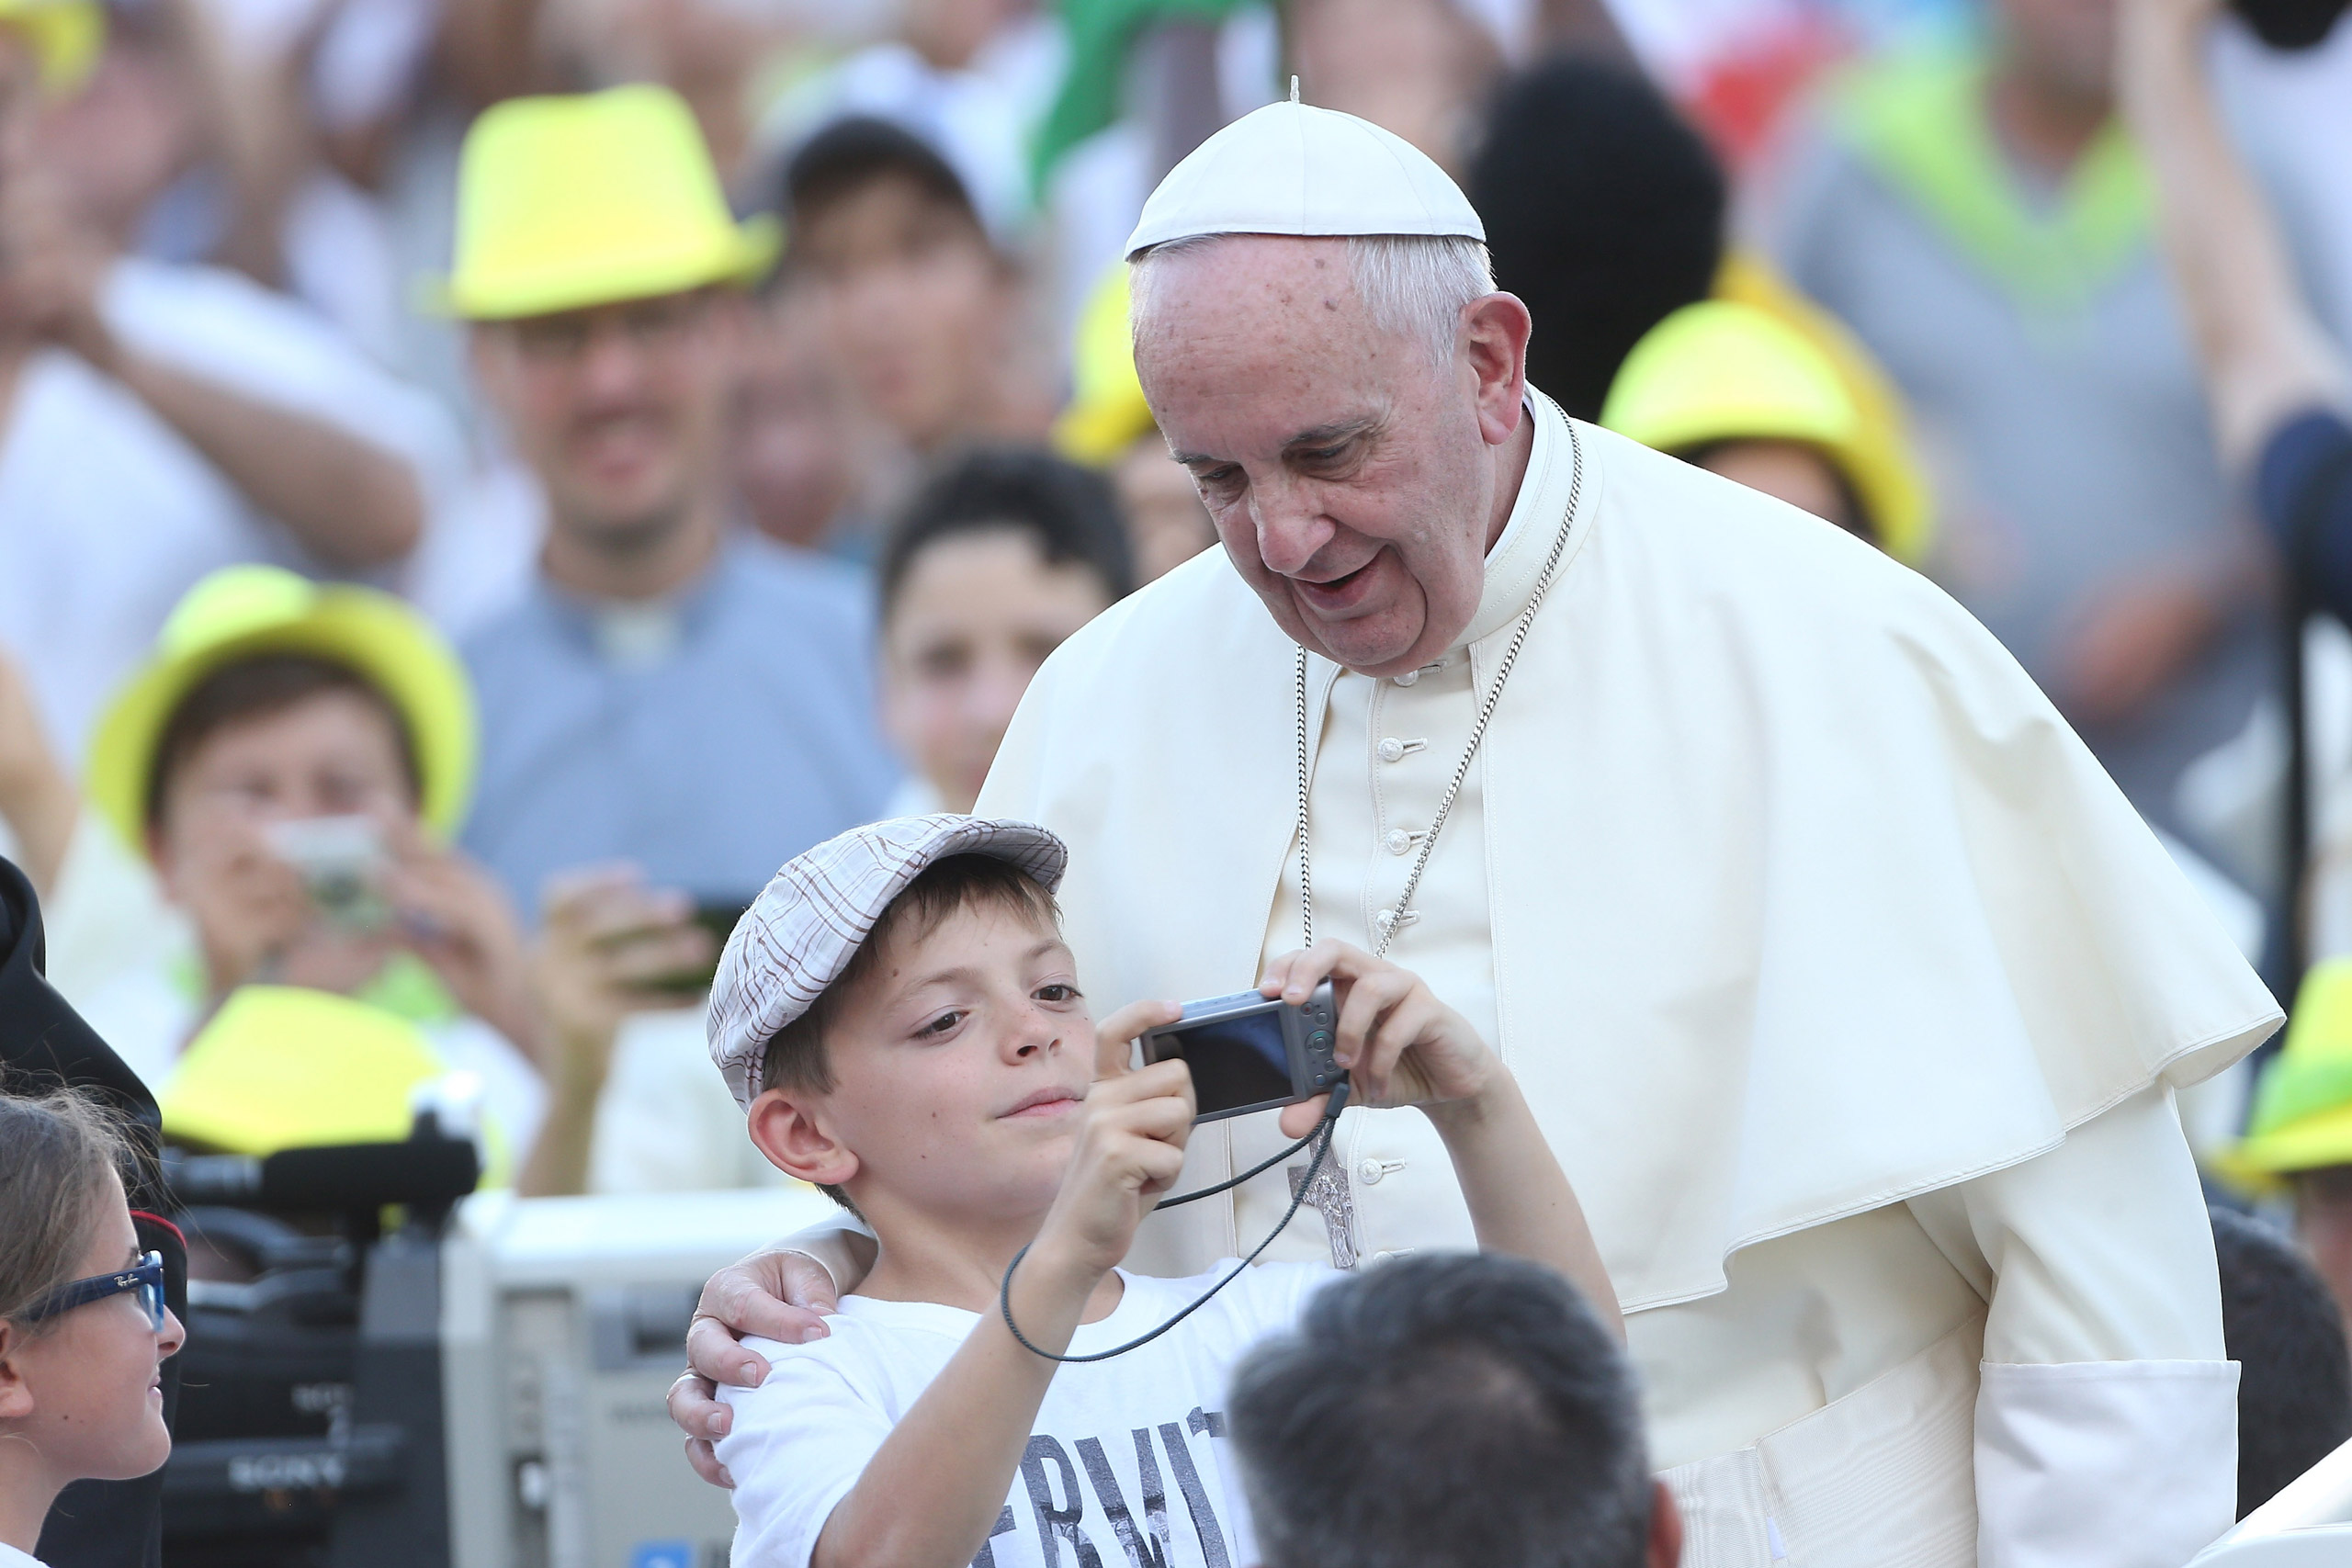 Pope Francis poses for a selfie as he arrives in St. Peter's Square for an audience in Vatican City on Aug. 4, 2015. (Franco Origlia—Getty Images)